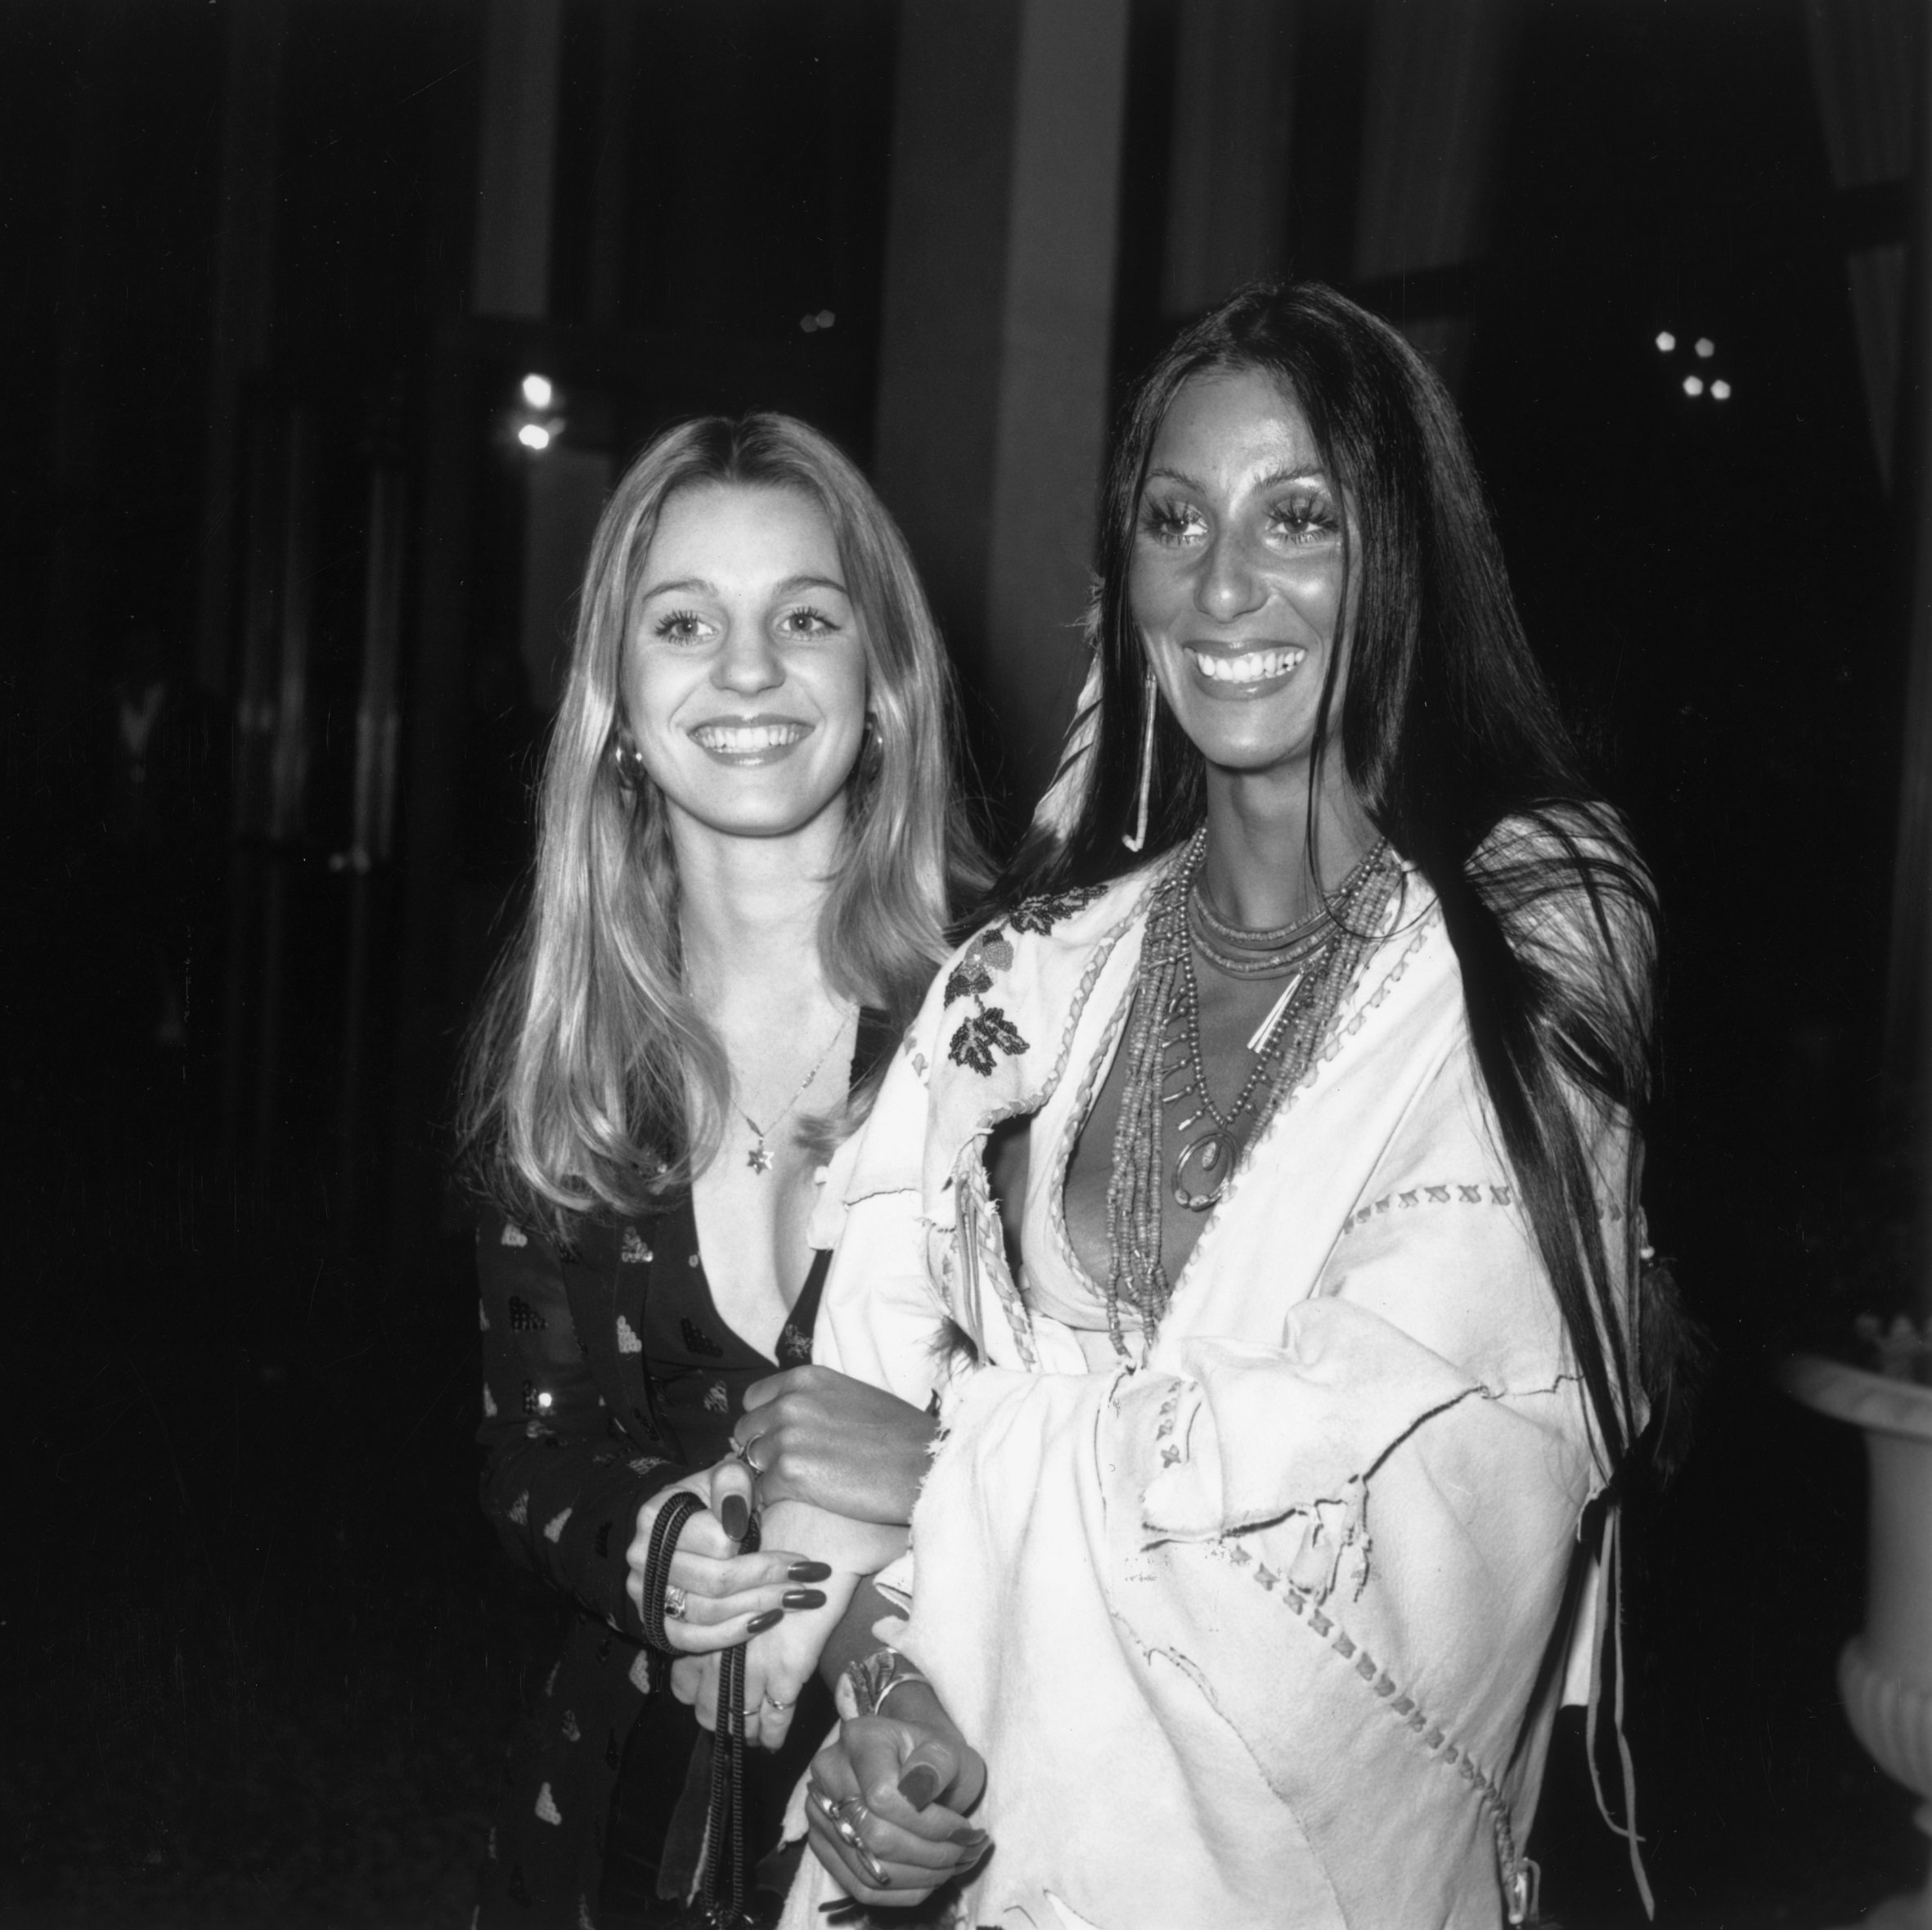 Georganne LaPiere smiling next to her half-sister Cher